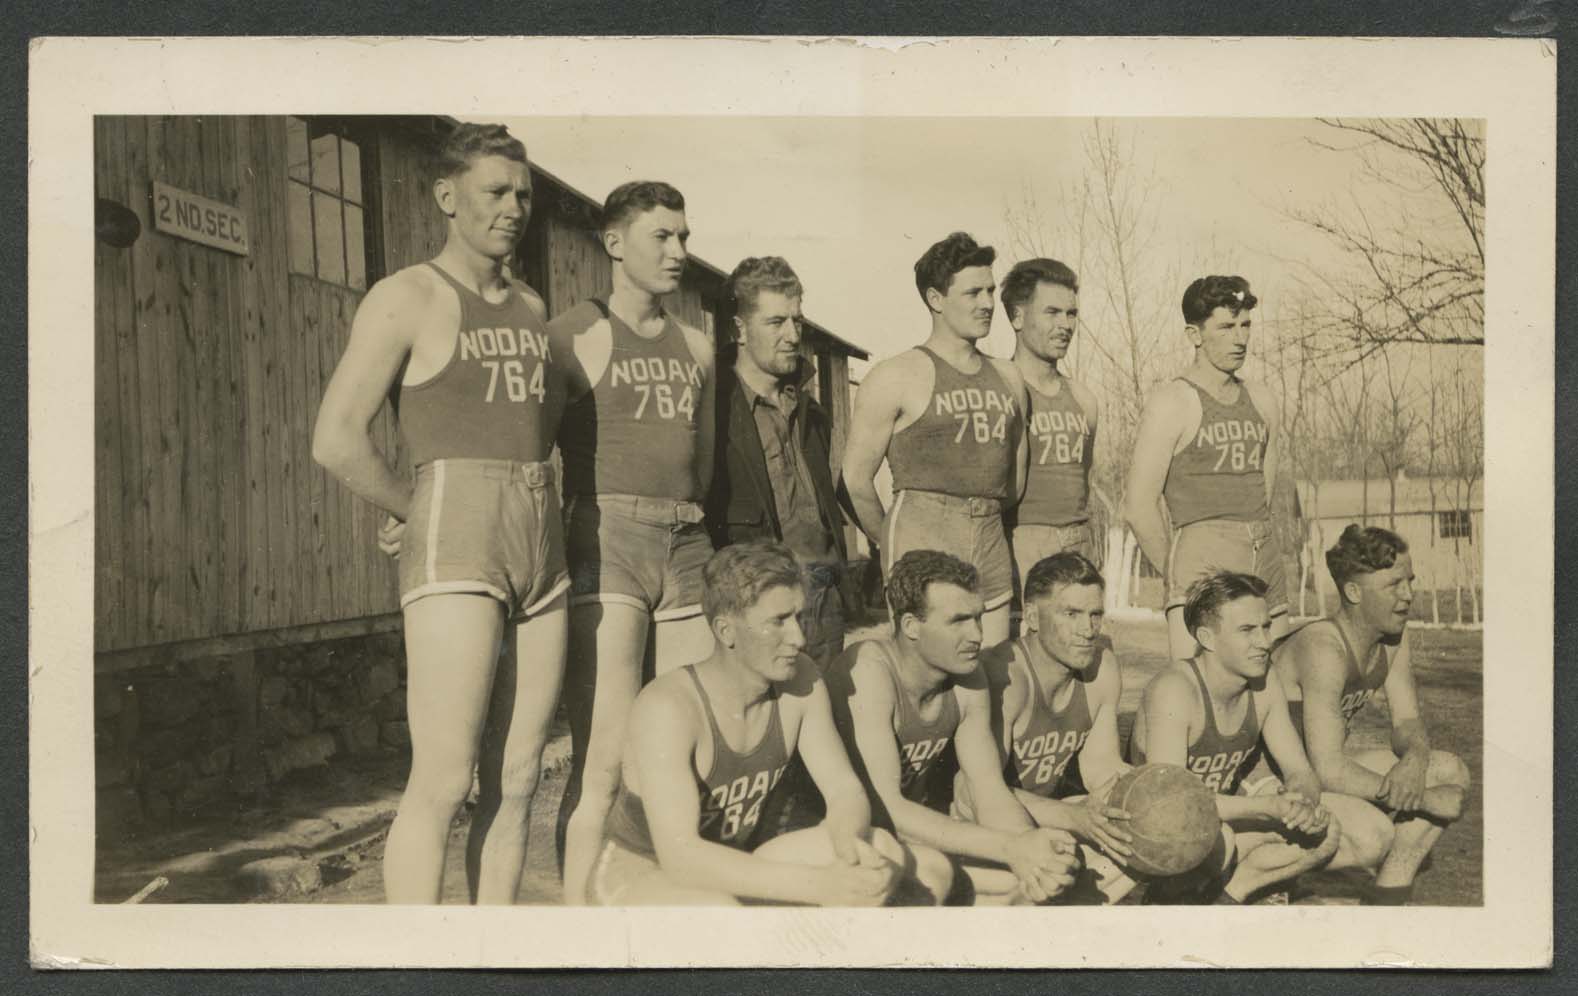 Basketball team stand near building with sign 2ND SEC, site unknown